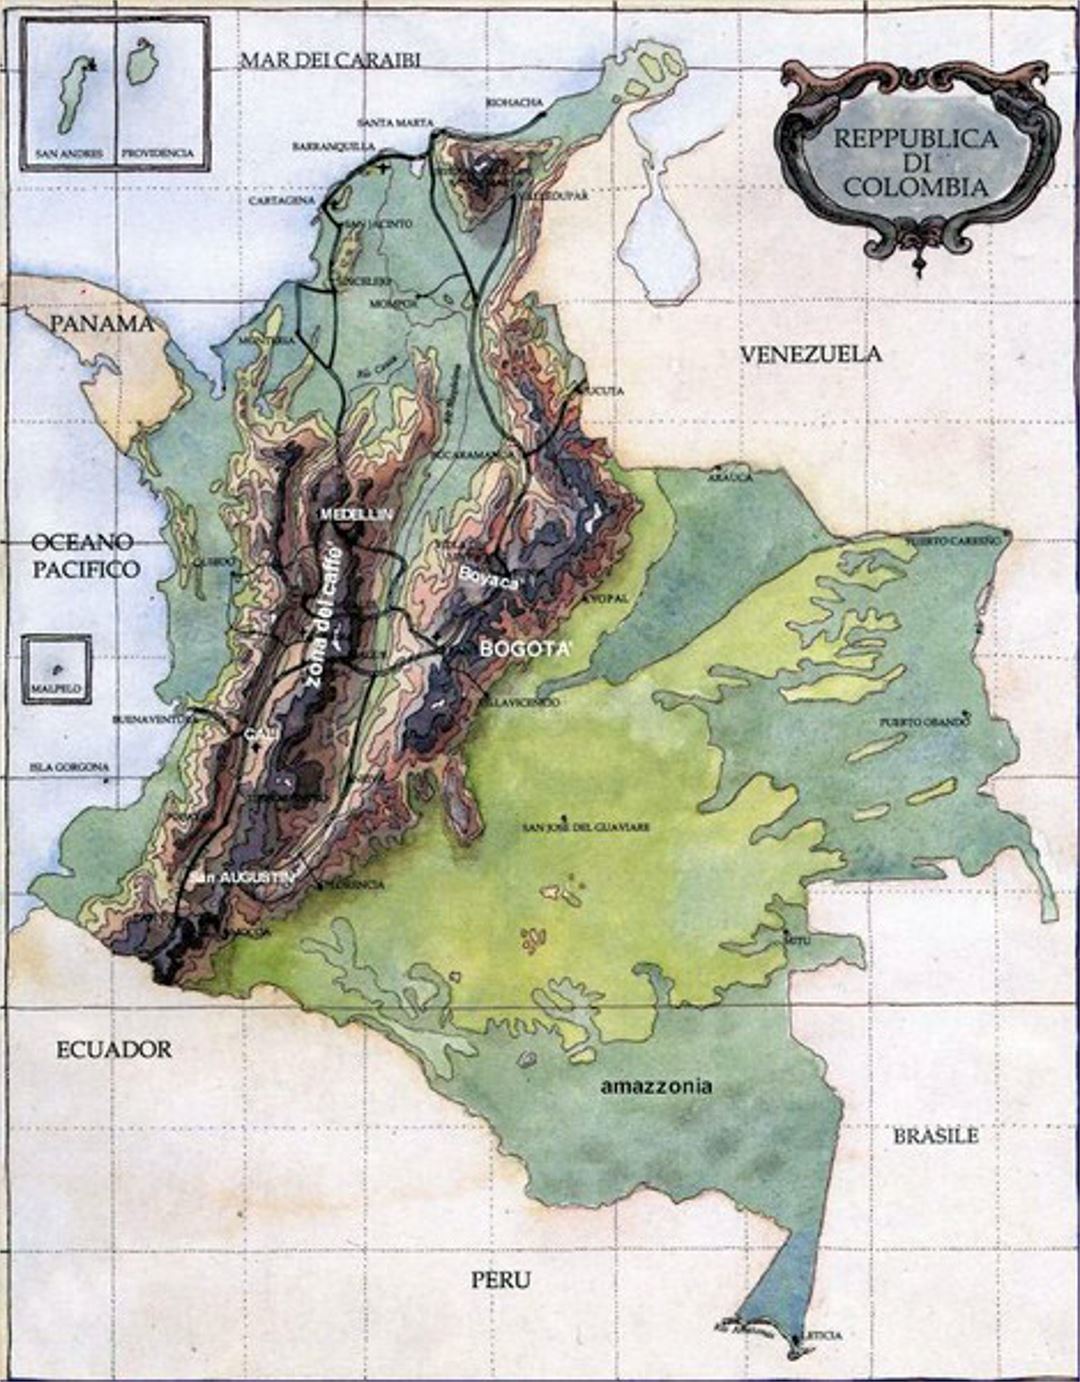 Terrain map of Colombia